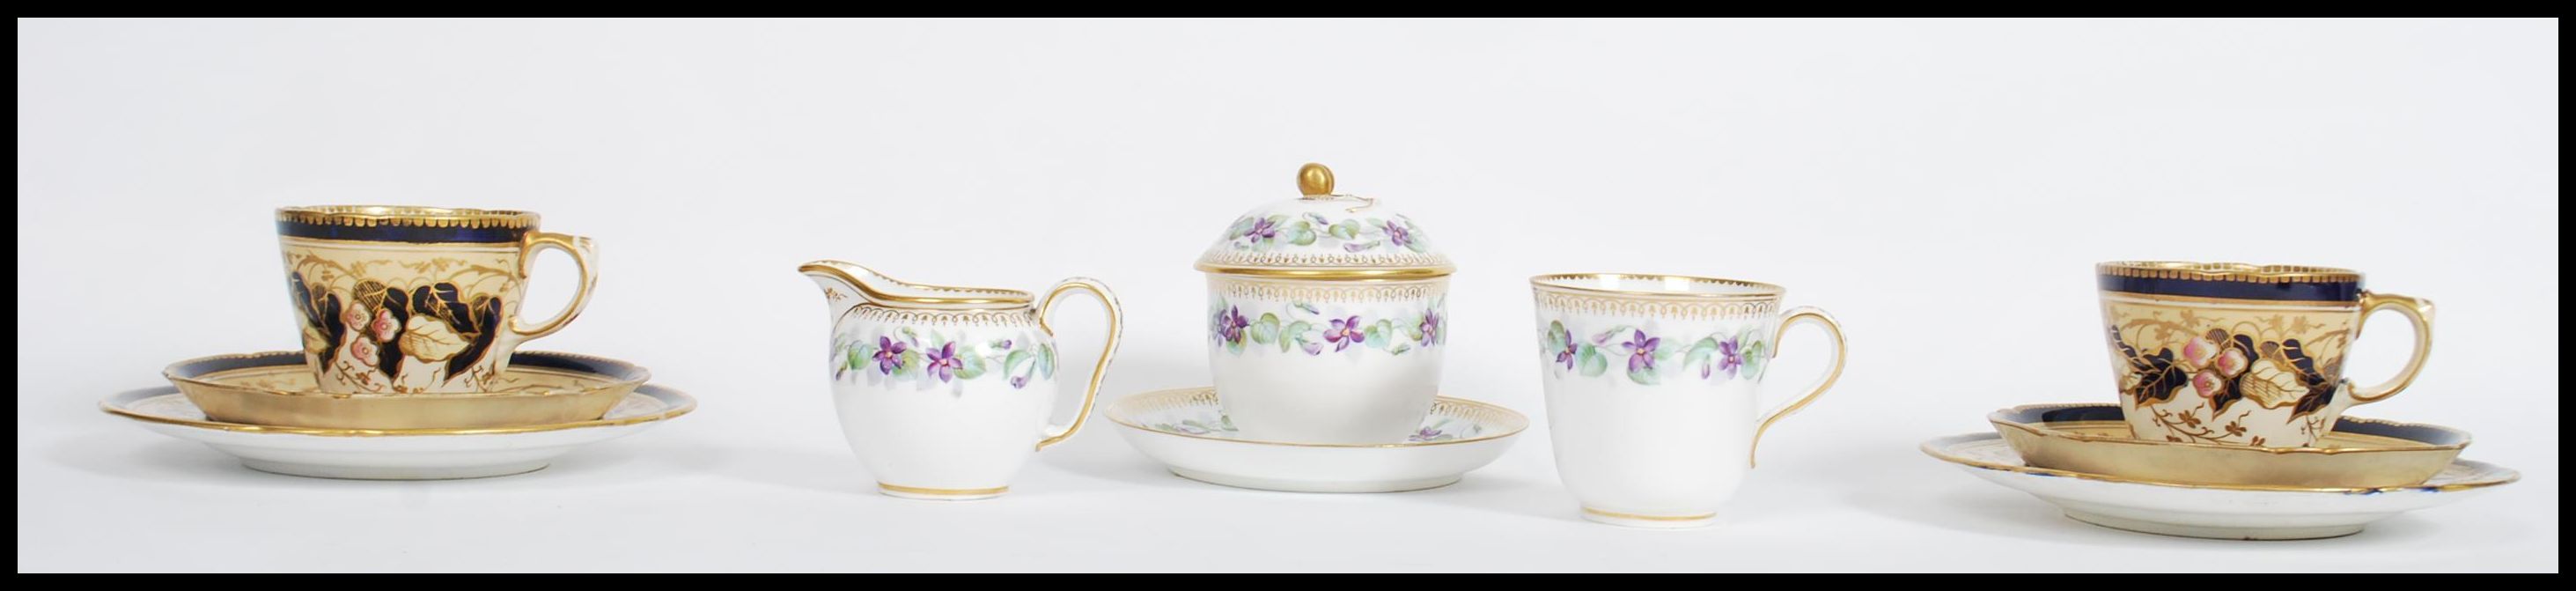 A 19th century Victorian Worcester cup saucer, lidded sugar bowl and creamer milk jug in a